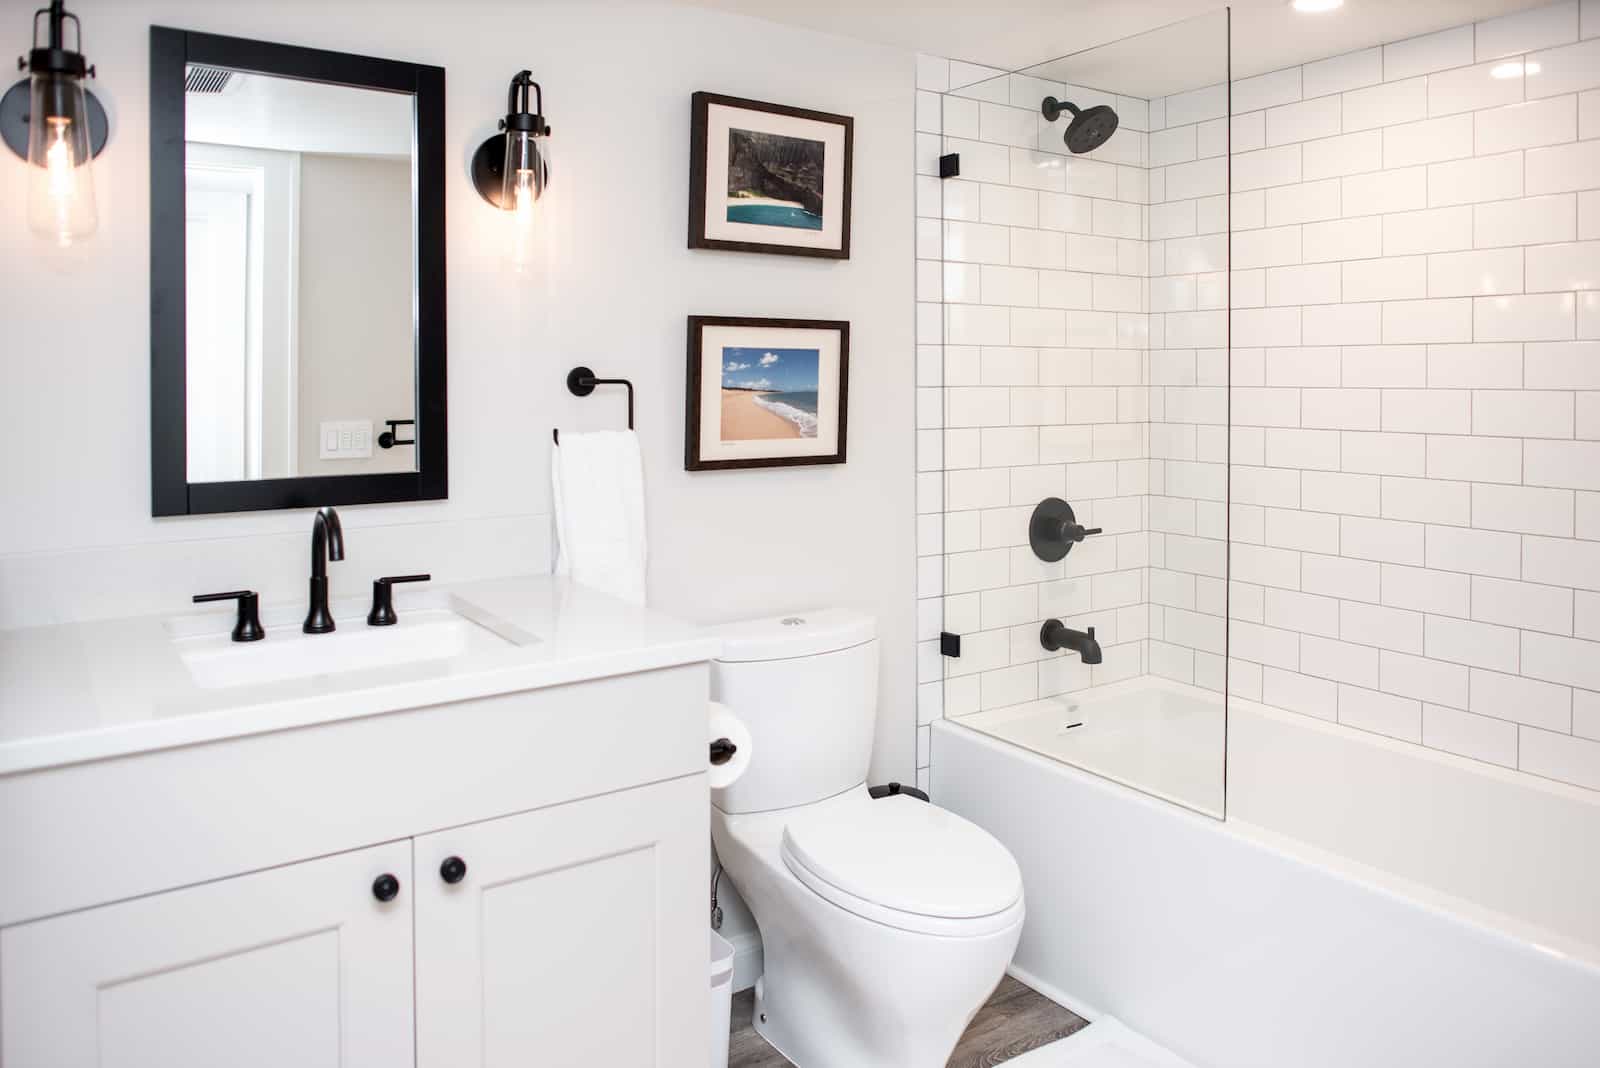 Are Permits Required For A Bathroom Remodel In Seattle - What Happens If You Build A Bathroom Without Permit